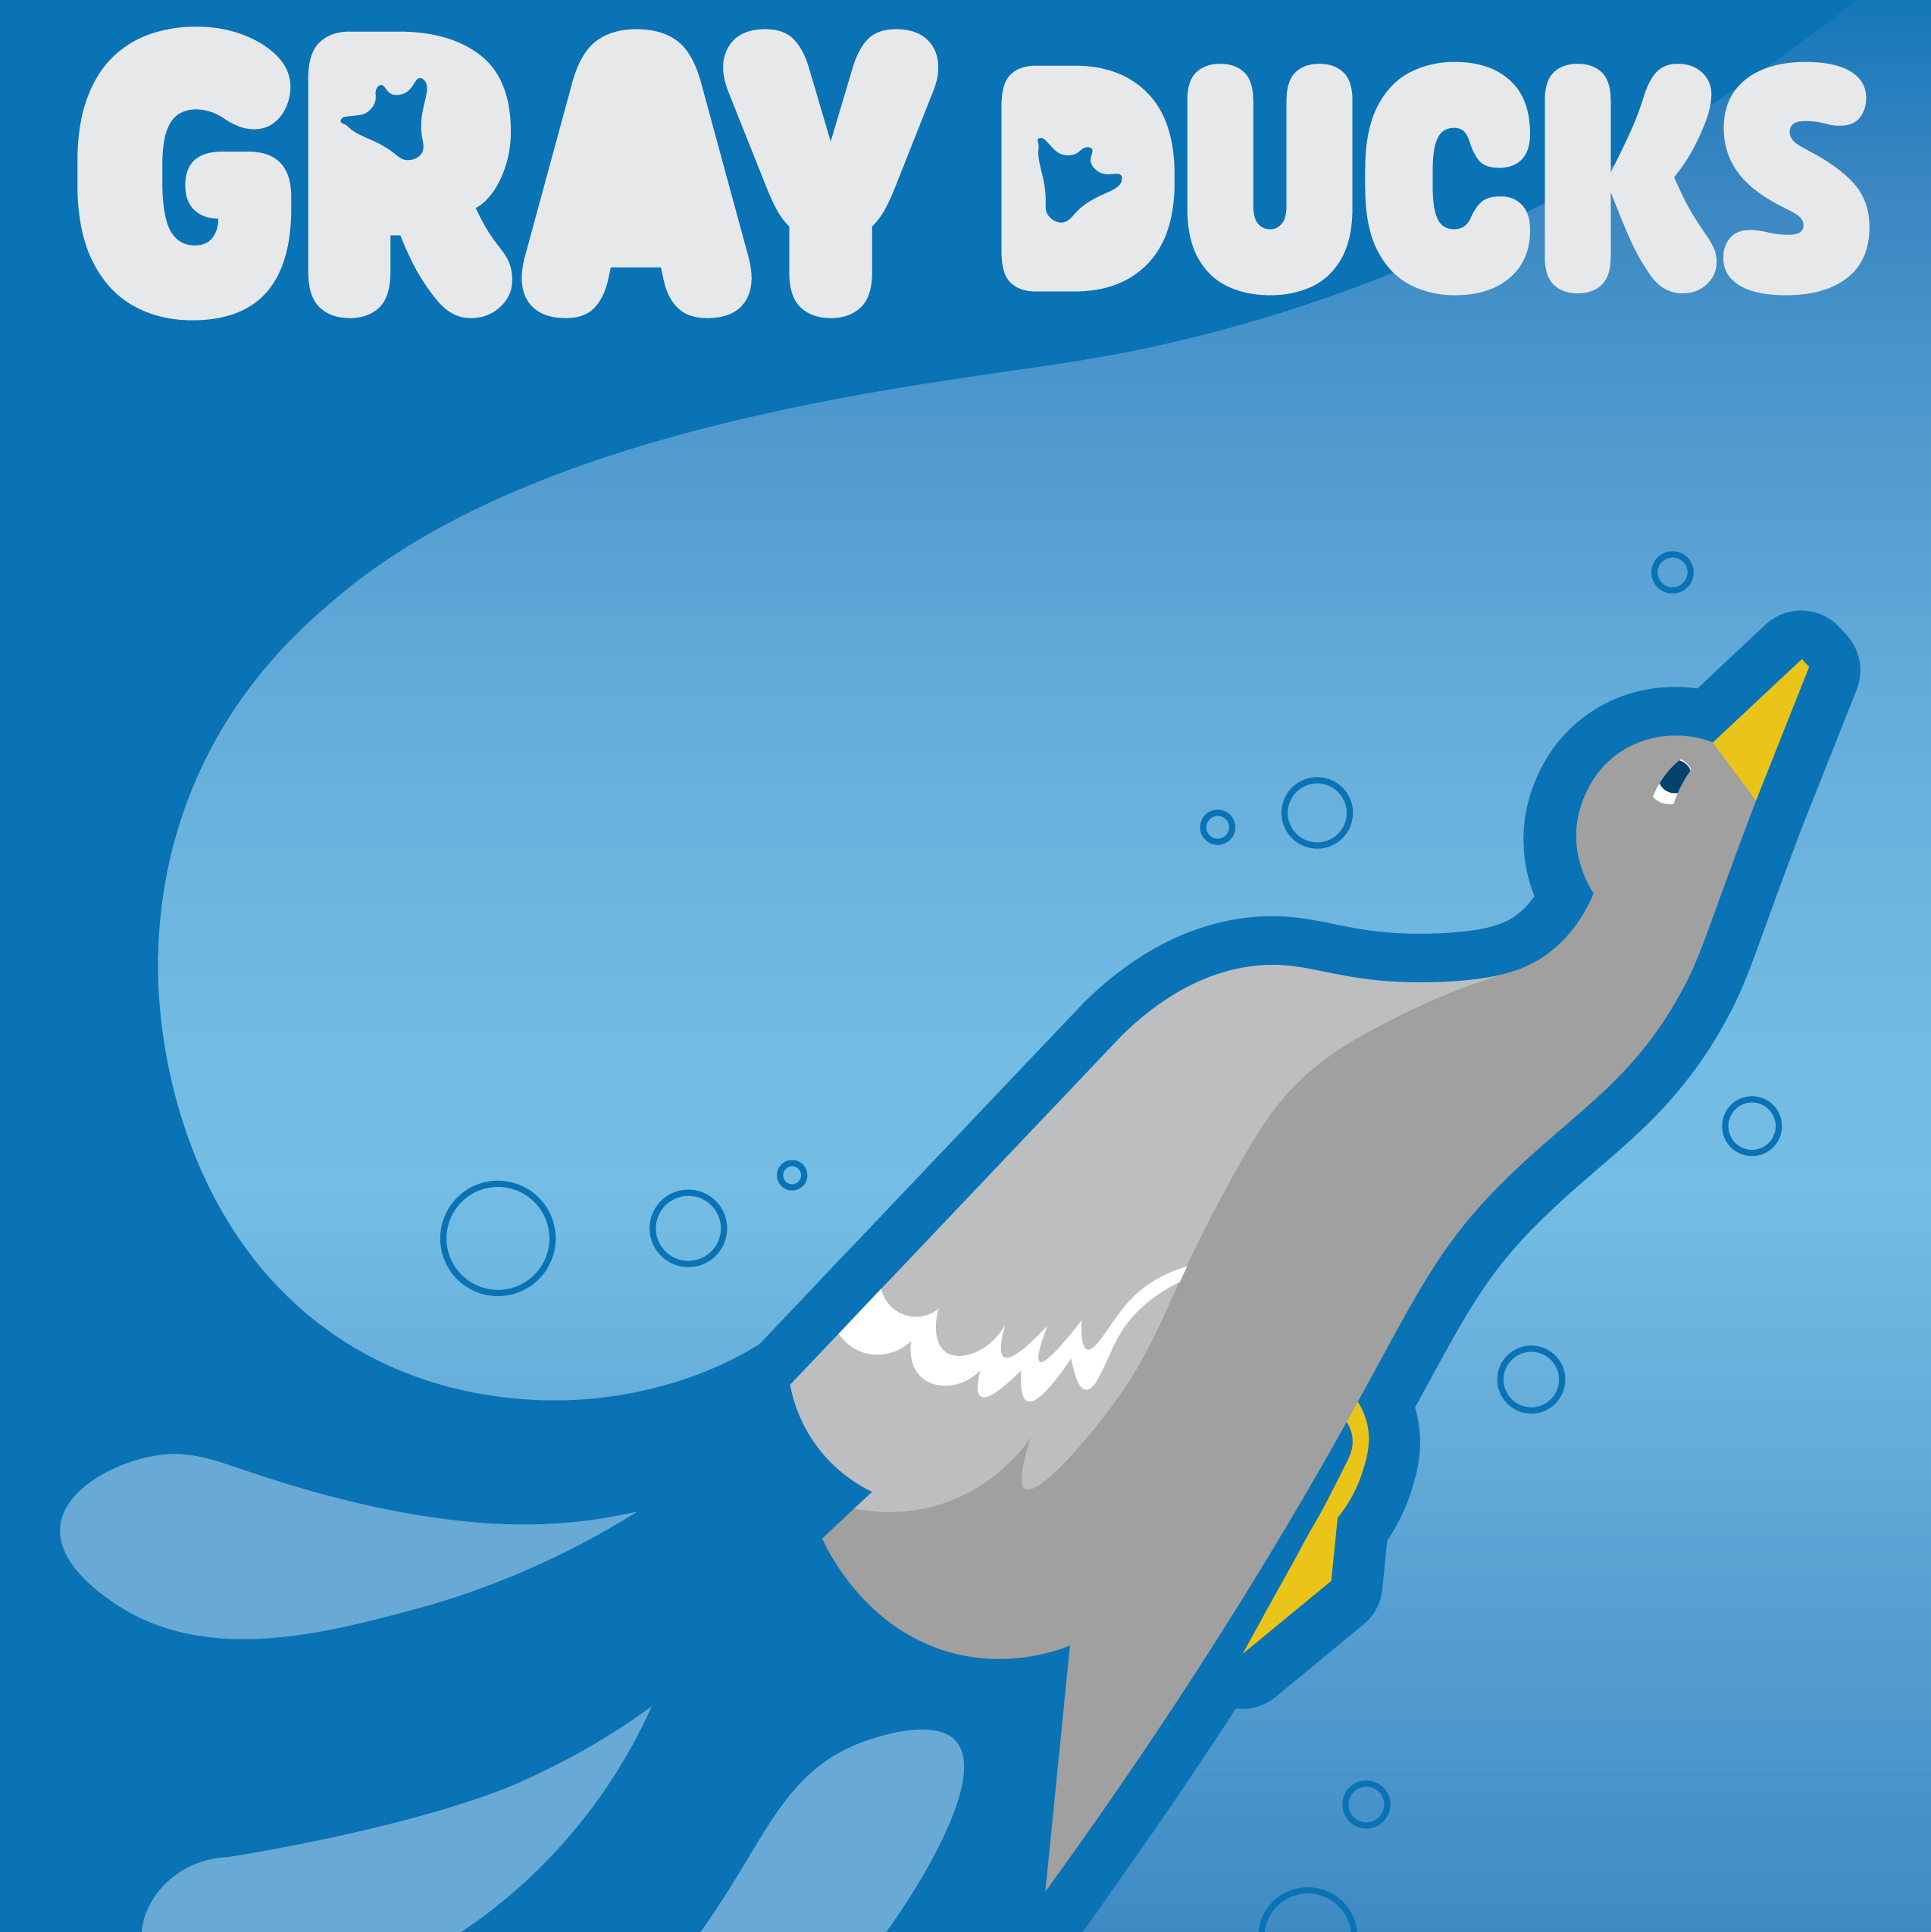 illustrated gray duck swimming upward with the title "gray ducks" 